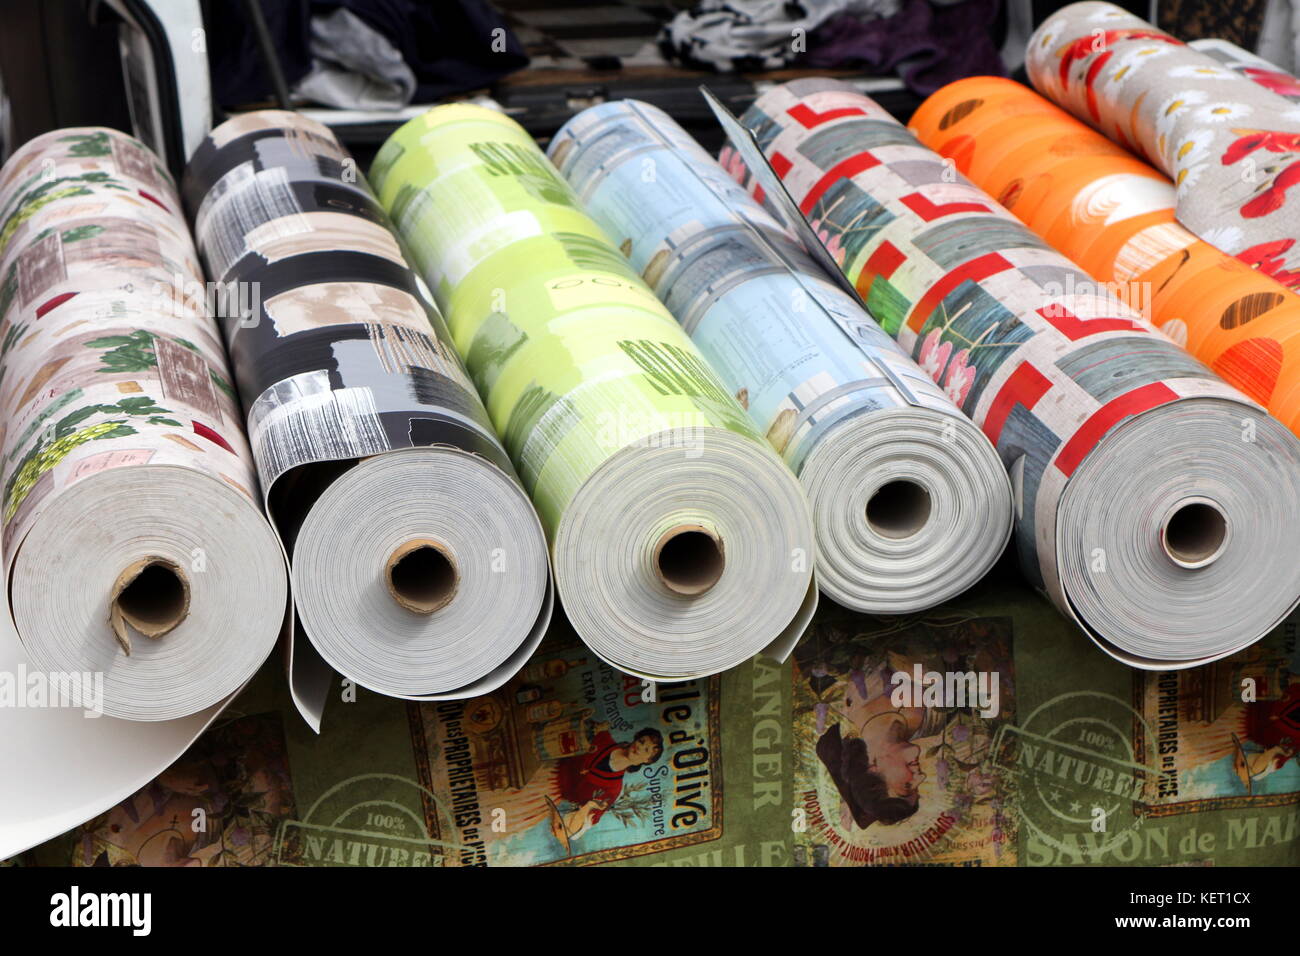 Rolls of vinyl floor covering, or linoleum, for sale at a French street market Stock Photo